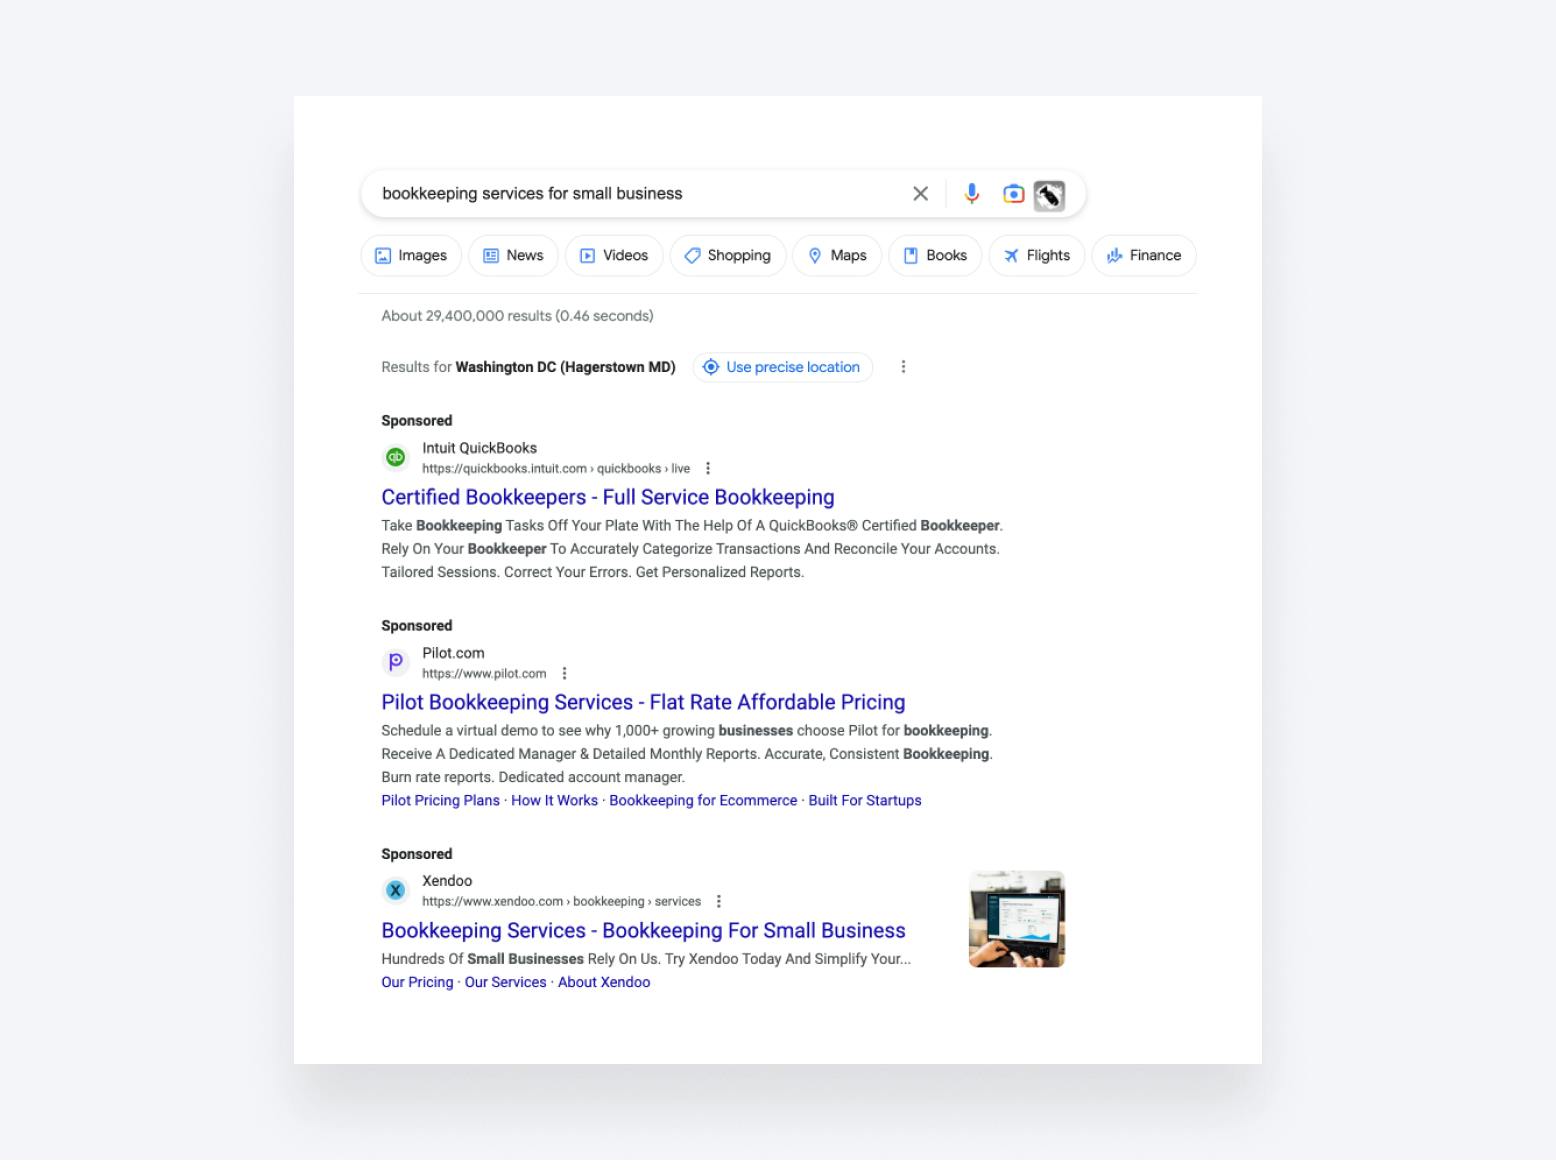 Google search ads for the "bookkeeping services for small business" keyword